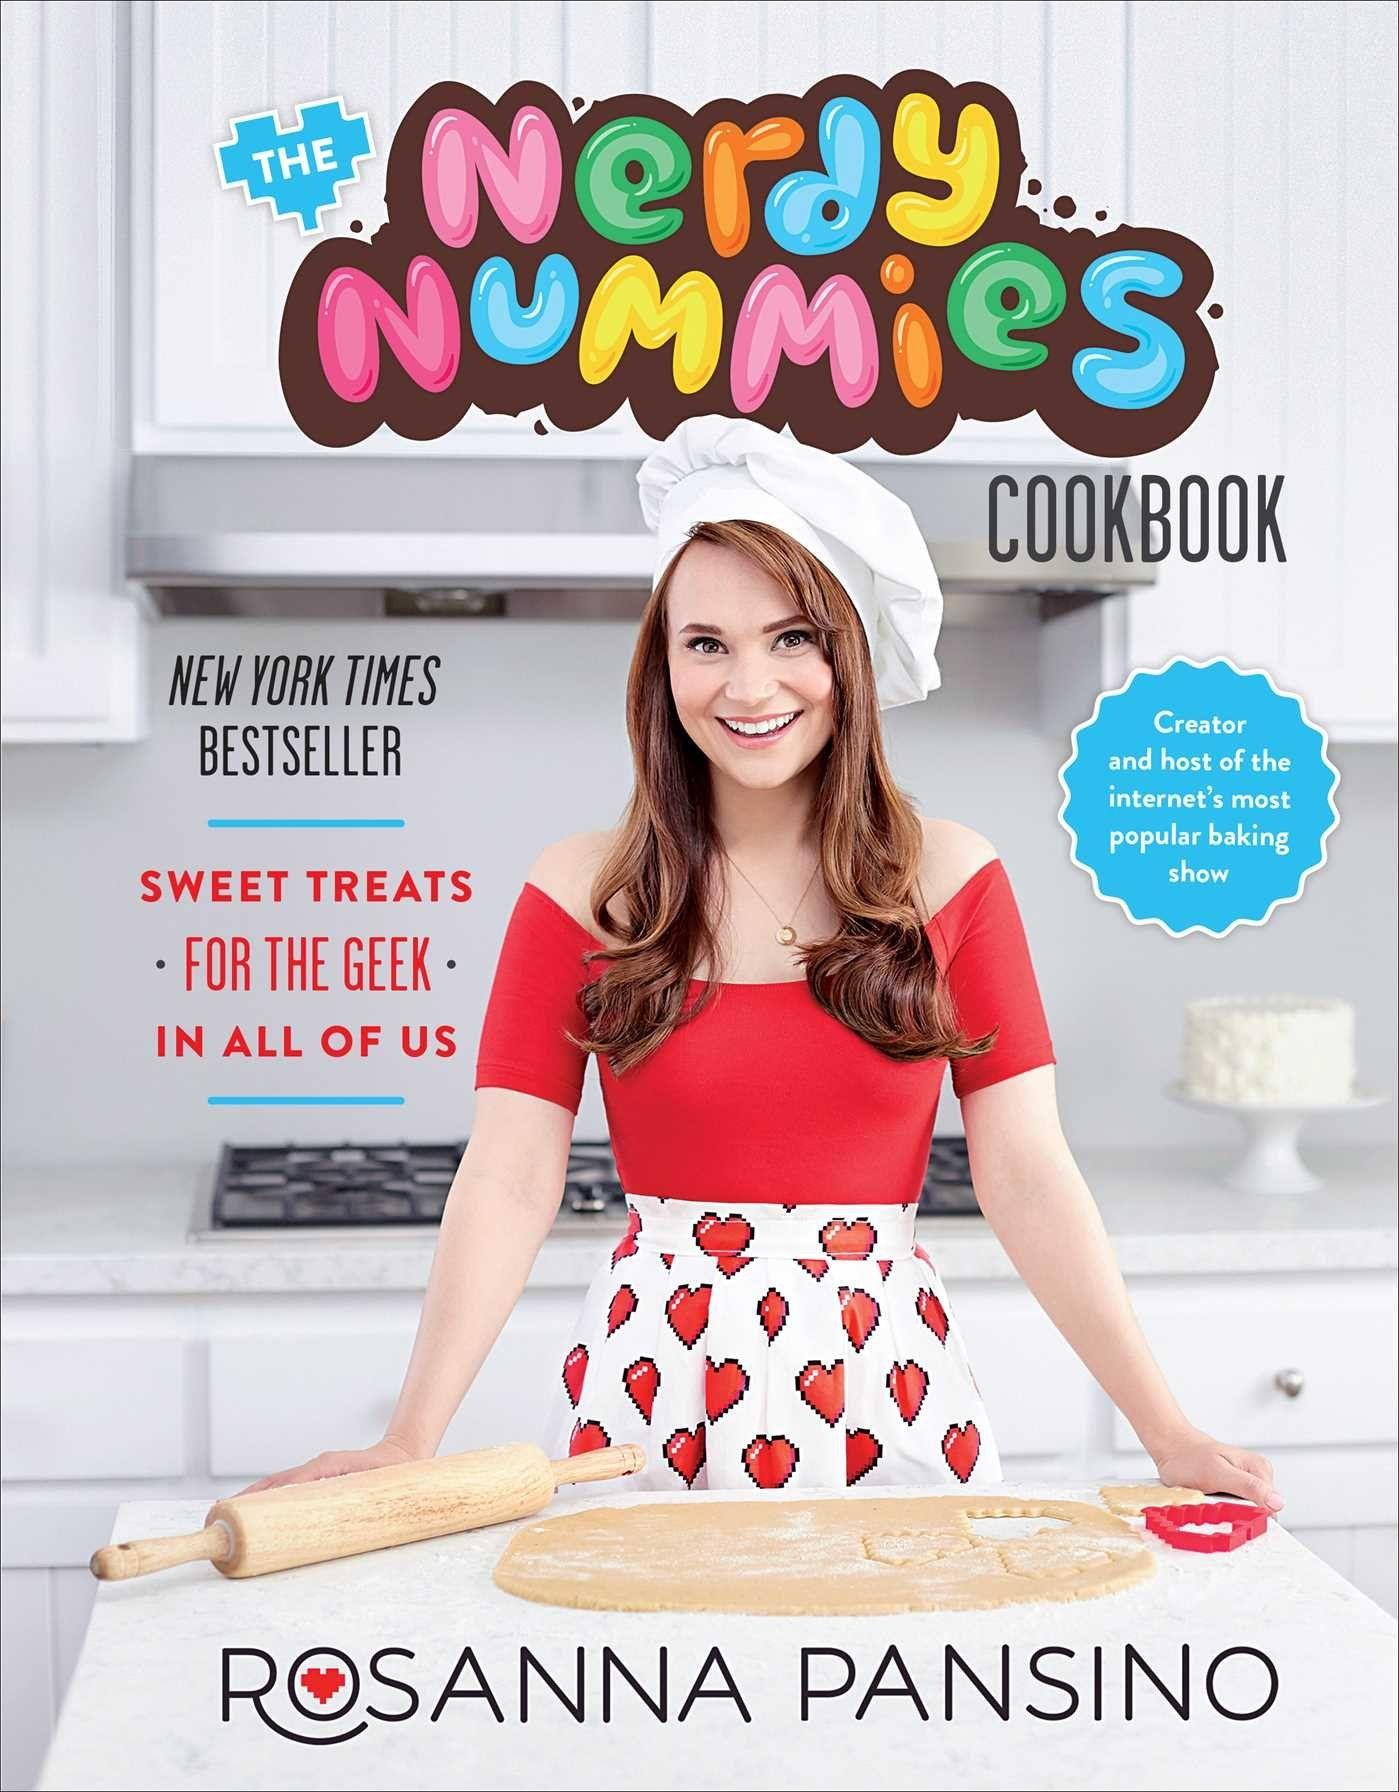 RosannaPansino Logo - The Nerdy Nummies Cookbook: Sweet Treats for the Geek in All of Us ...